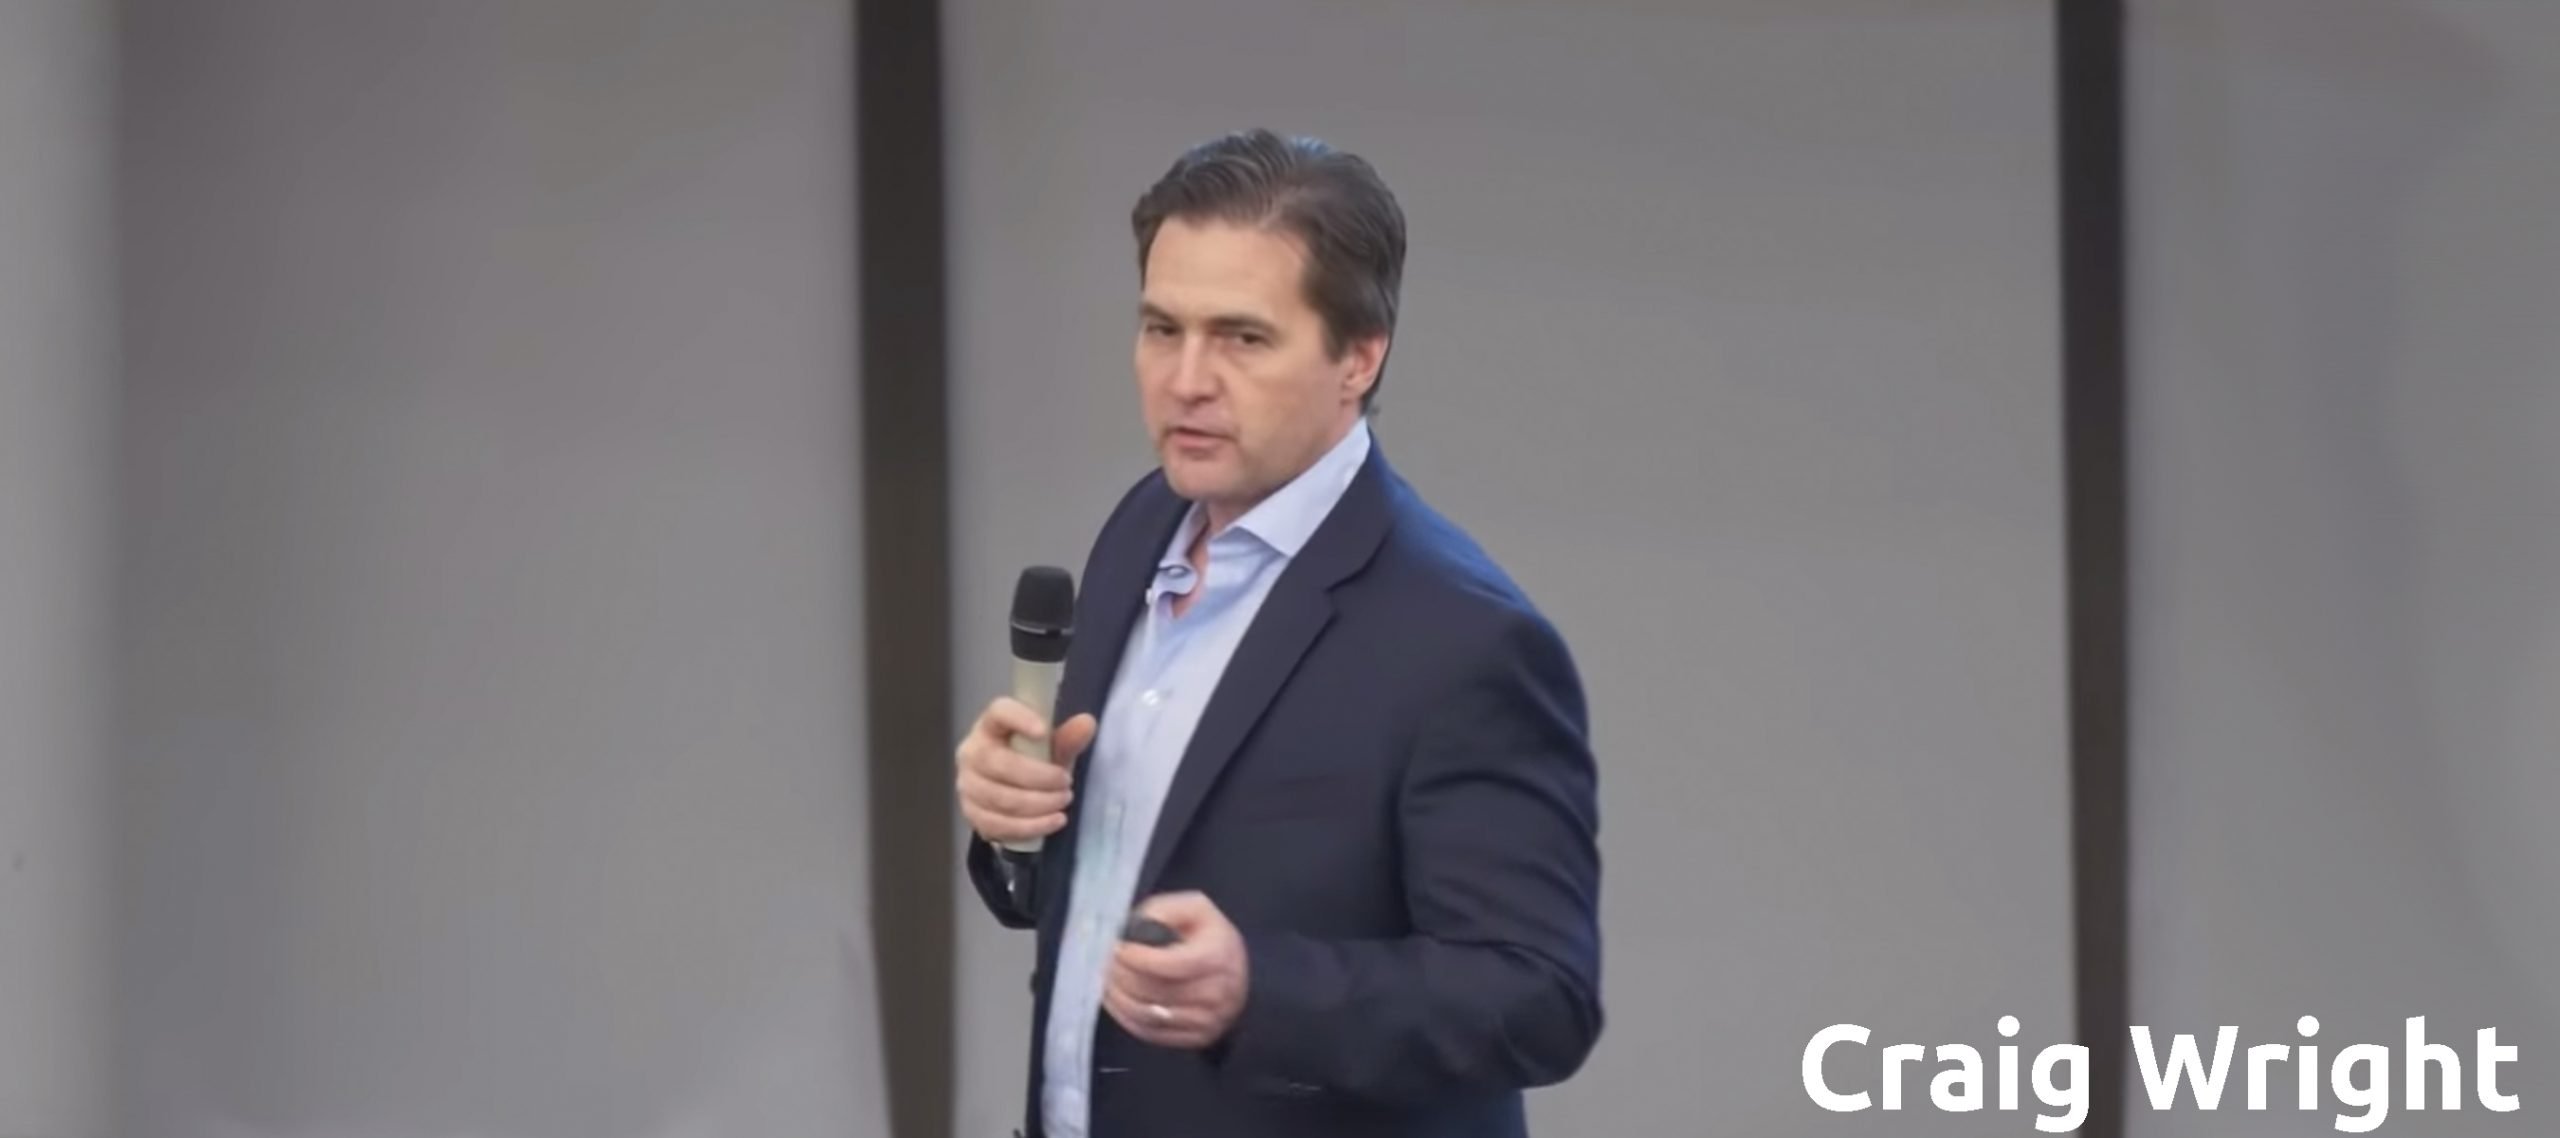 Craig Wright's $100B Theft Claim - BTC and BCH Used His Database Without Permission